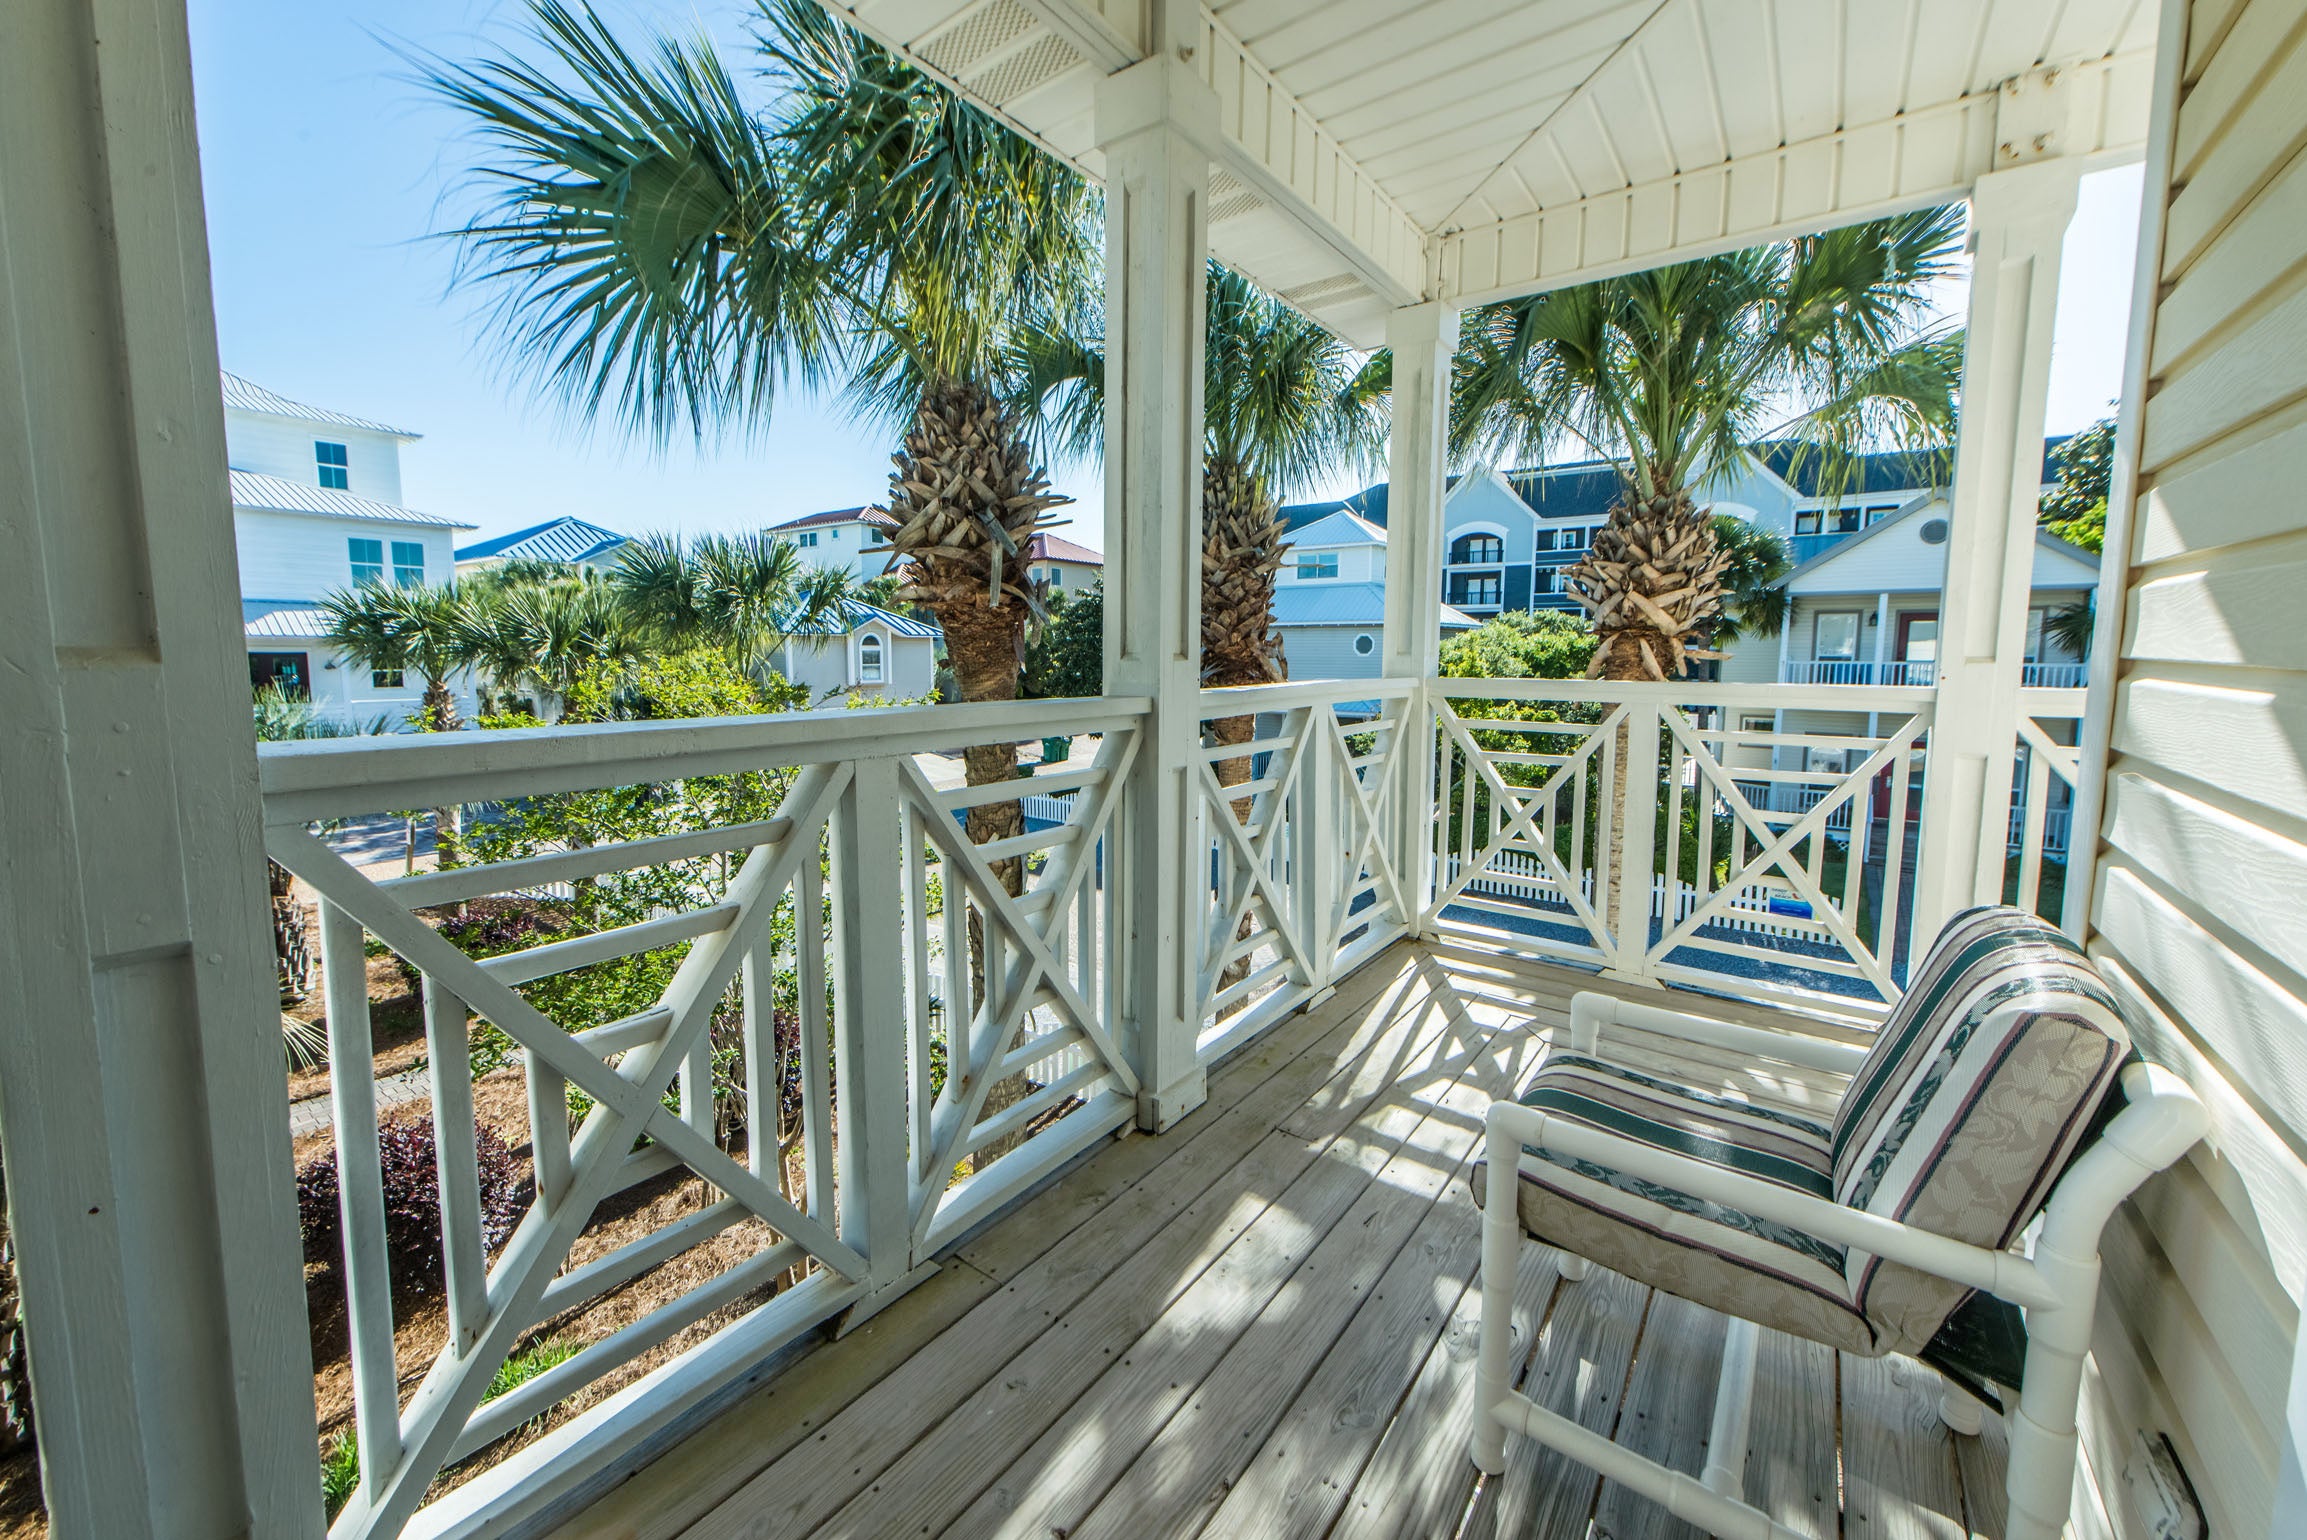 Welcoming Covered Porch shaded by Palms